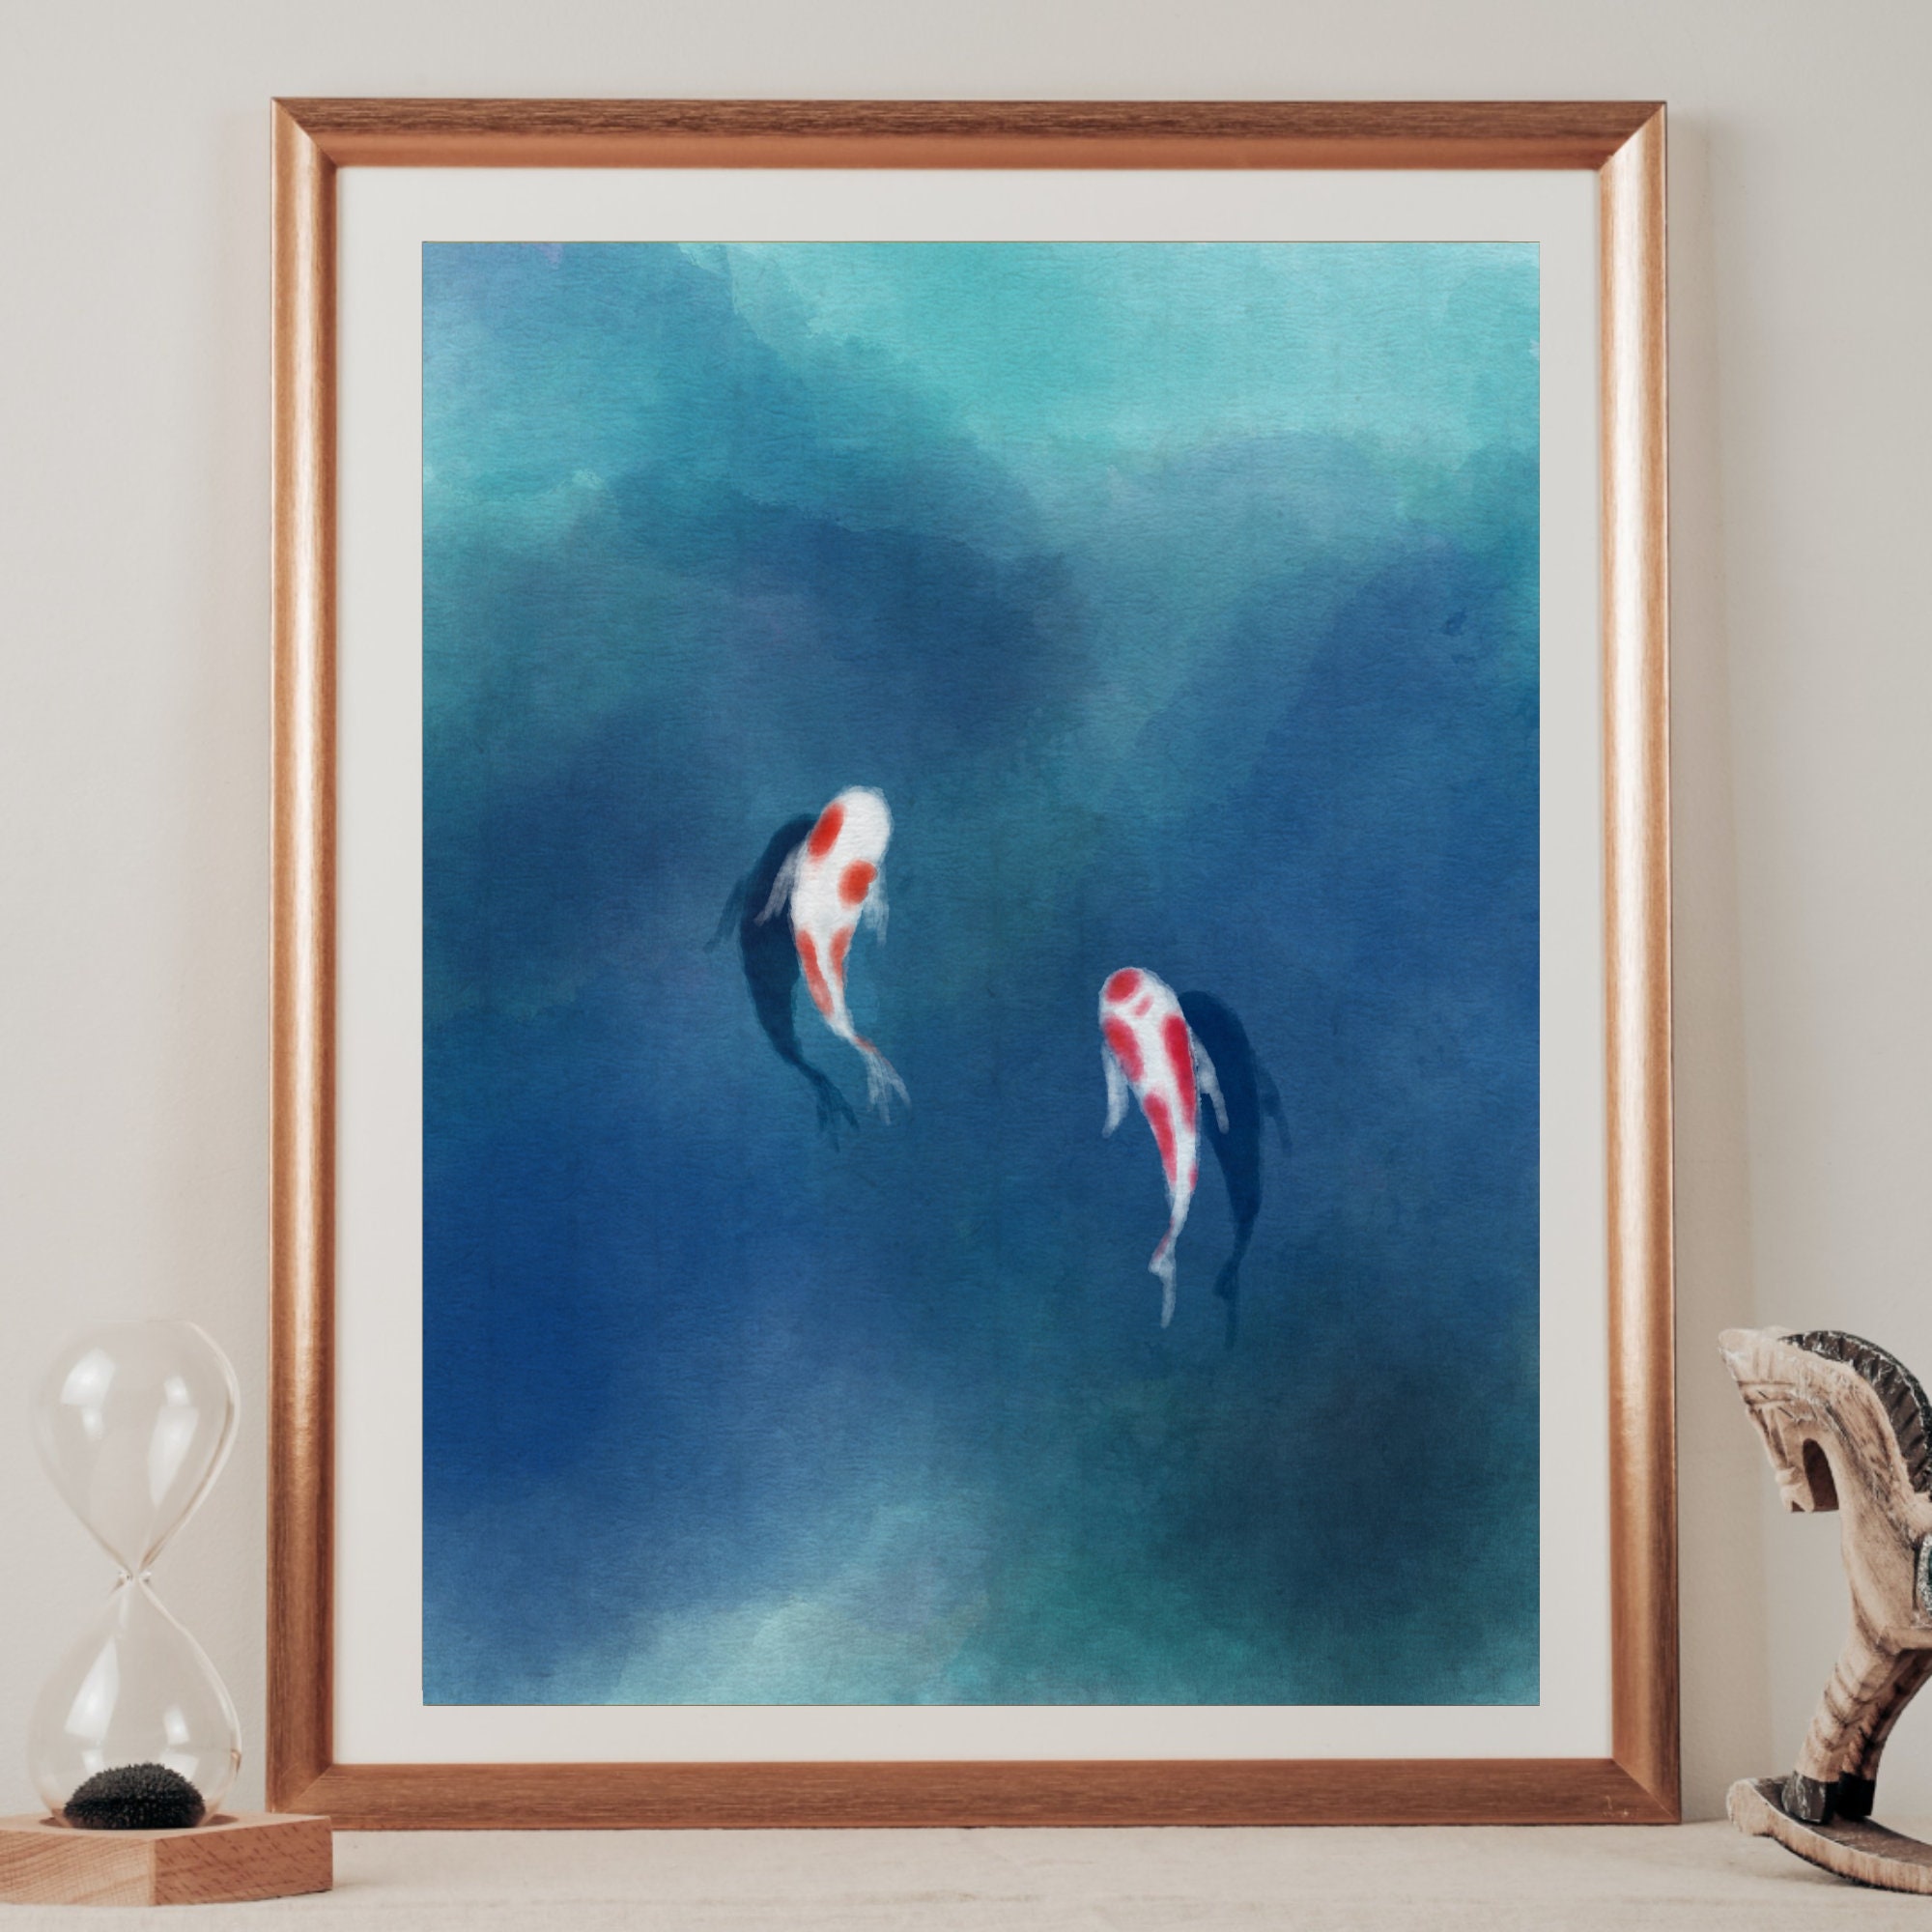 Koi - Colorful Koi Watercolor Painting - Fine Art Print from Original  Watercolor Painting - Bright, Colorful Decor